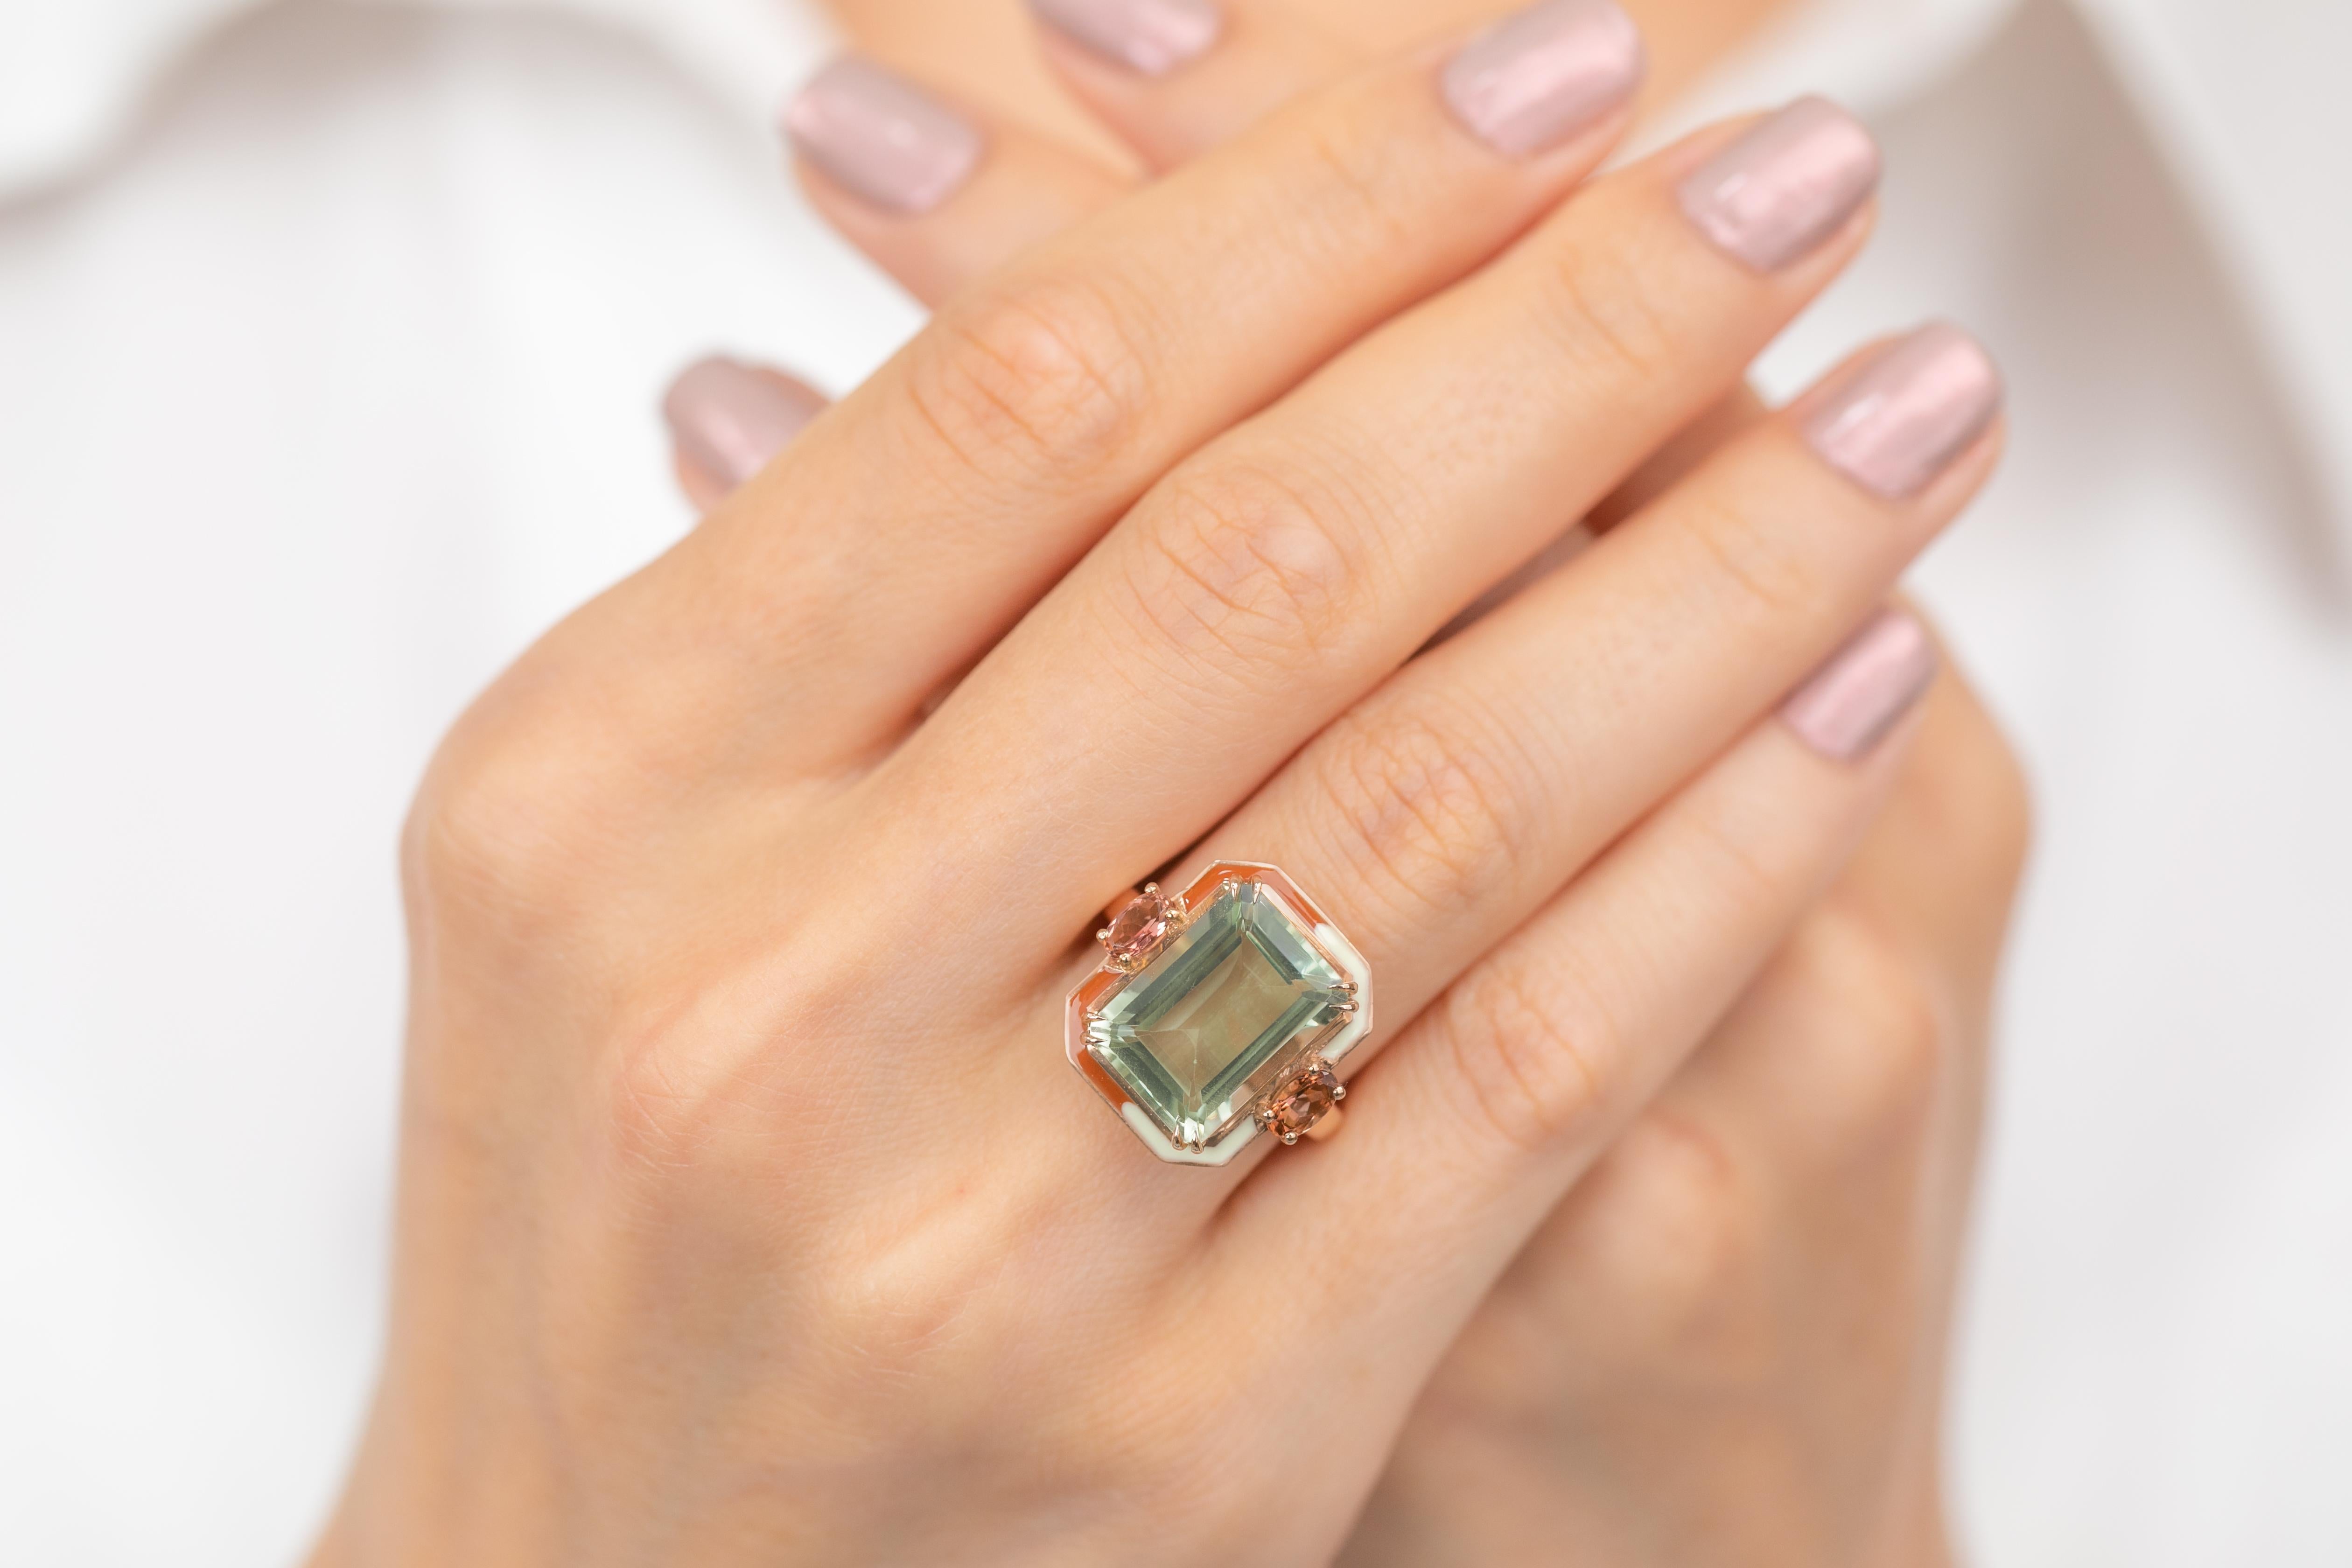 For Sale:  Artdeco Style Ring, 14k Solid Gold, Green Amethyst and Pink Tourmaline Stone Ring 14